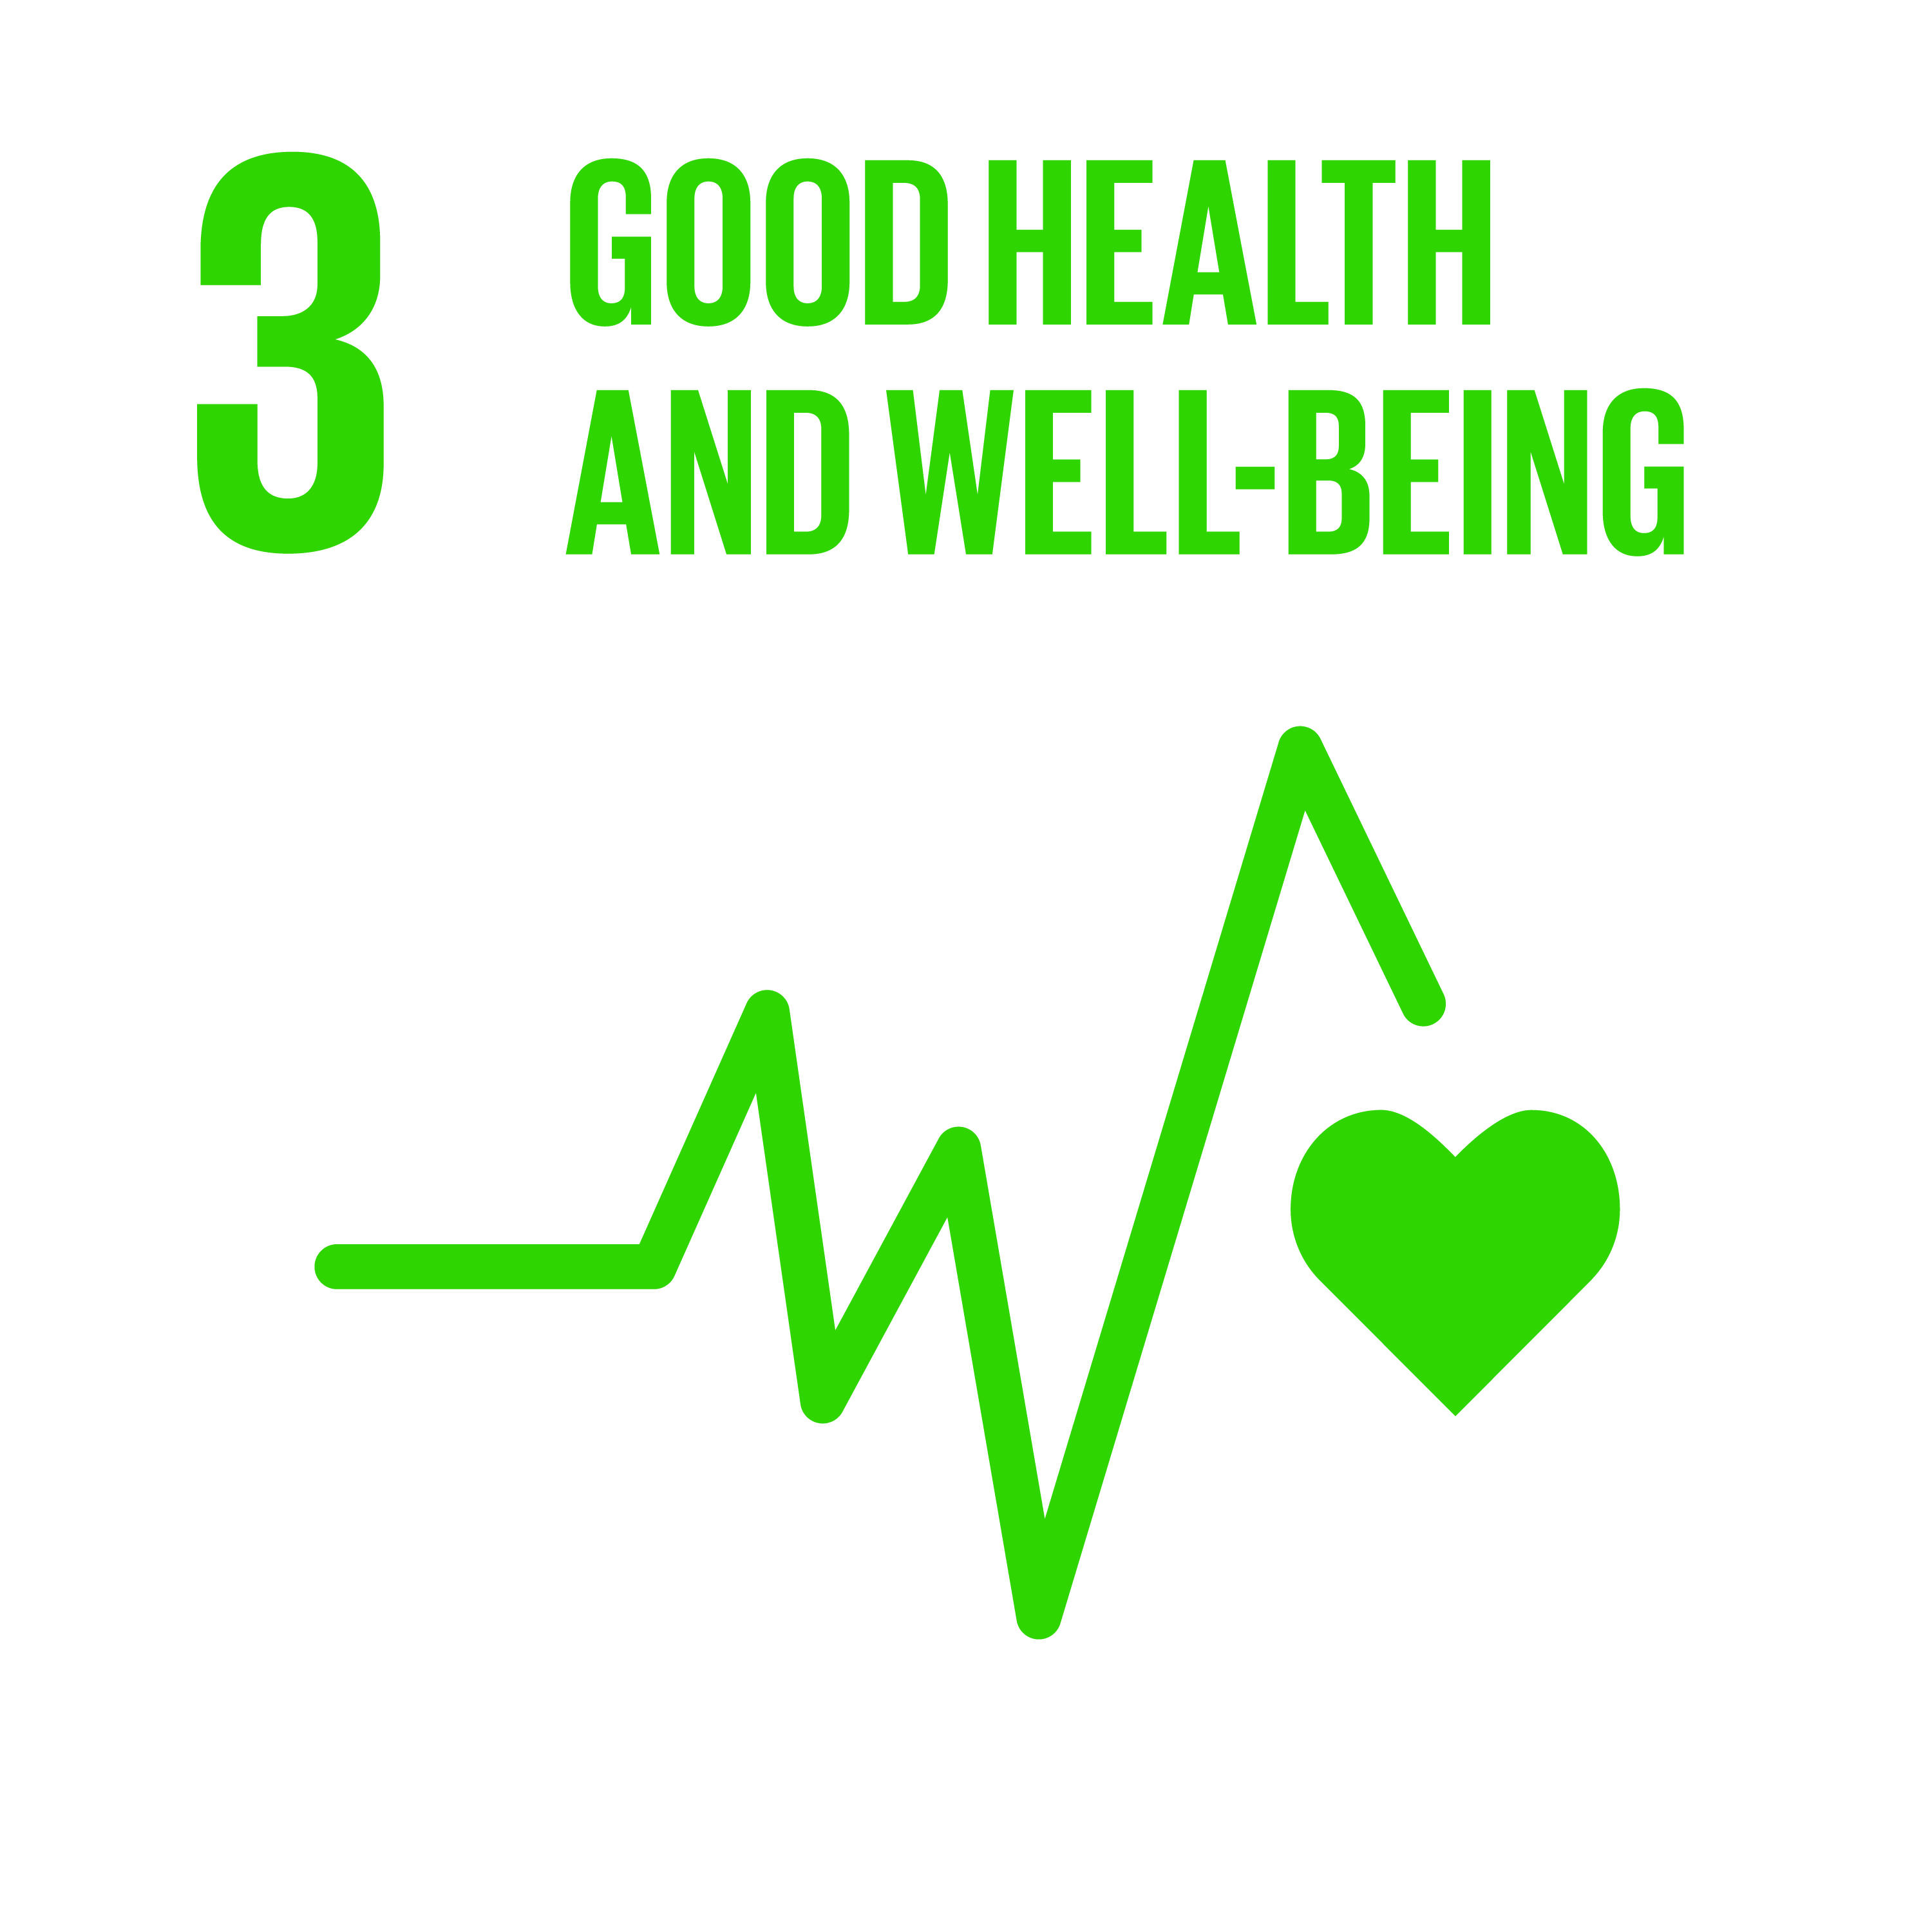 Sustainable development goals: Good health and well-being